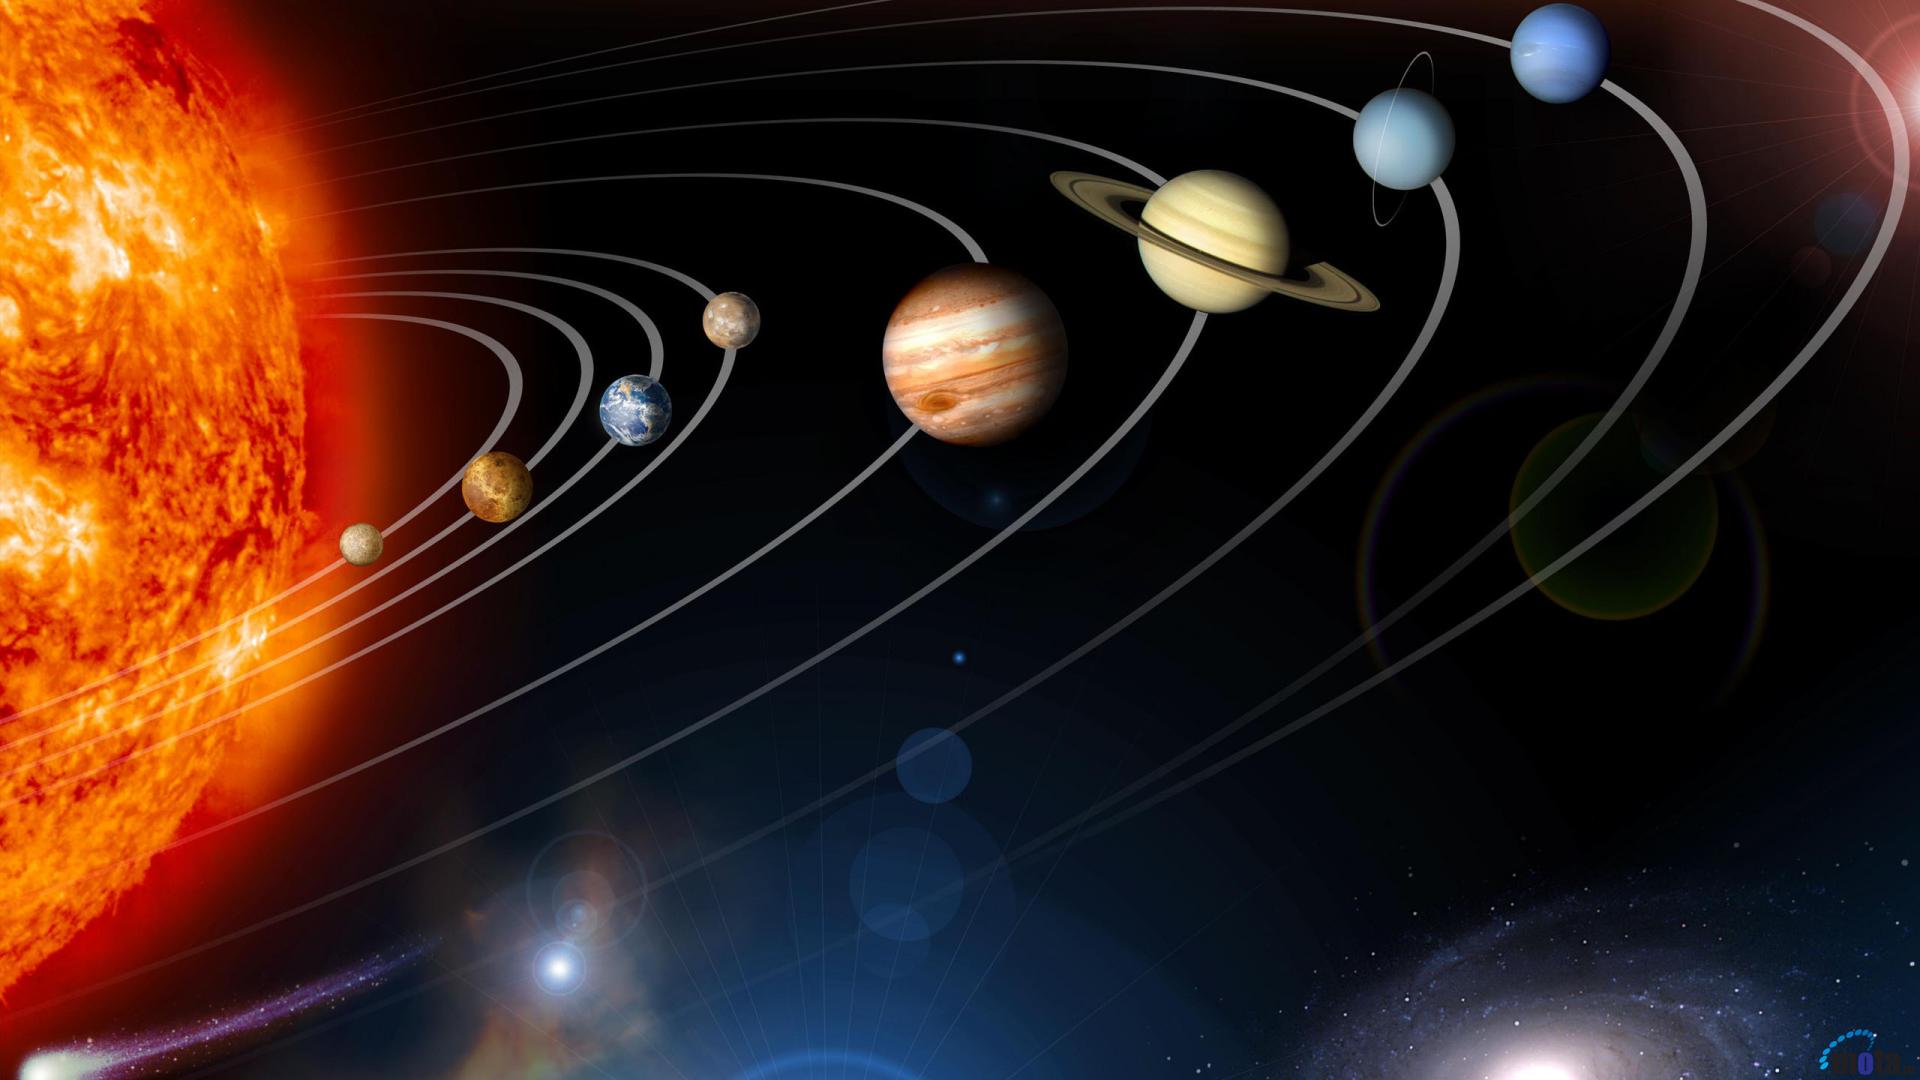 Solar System Hd Wallpapers 1080p (page 4) - Pics about space